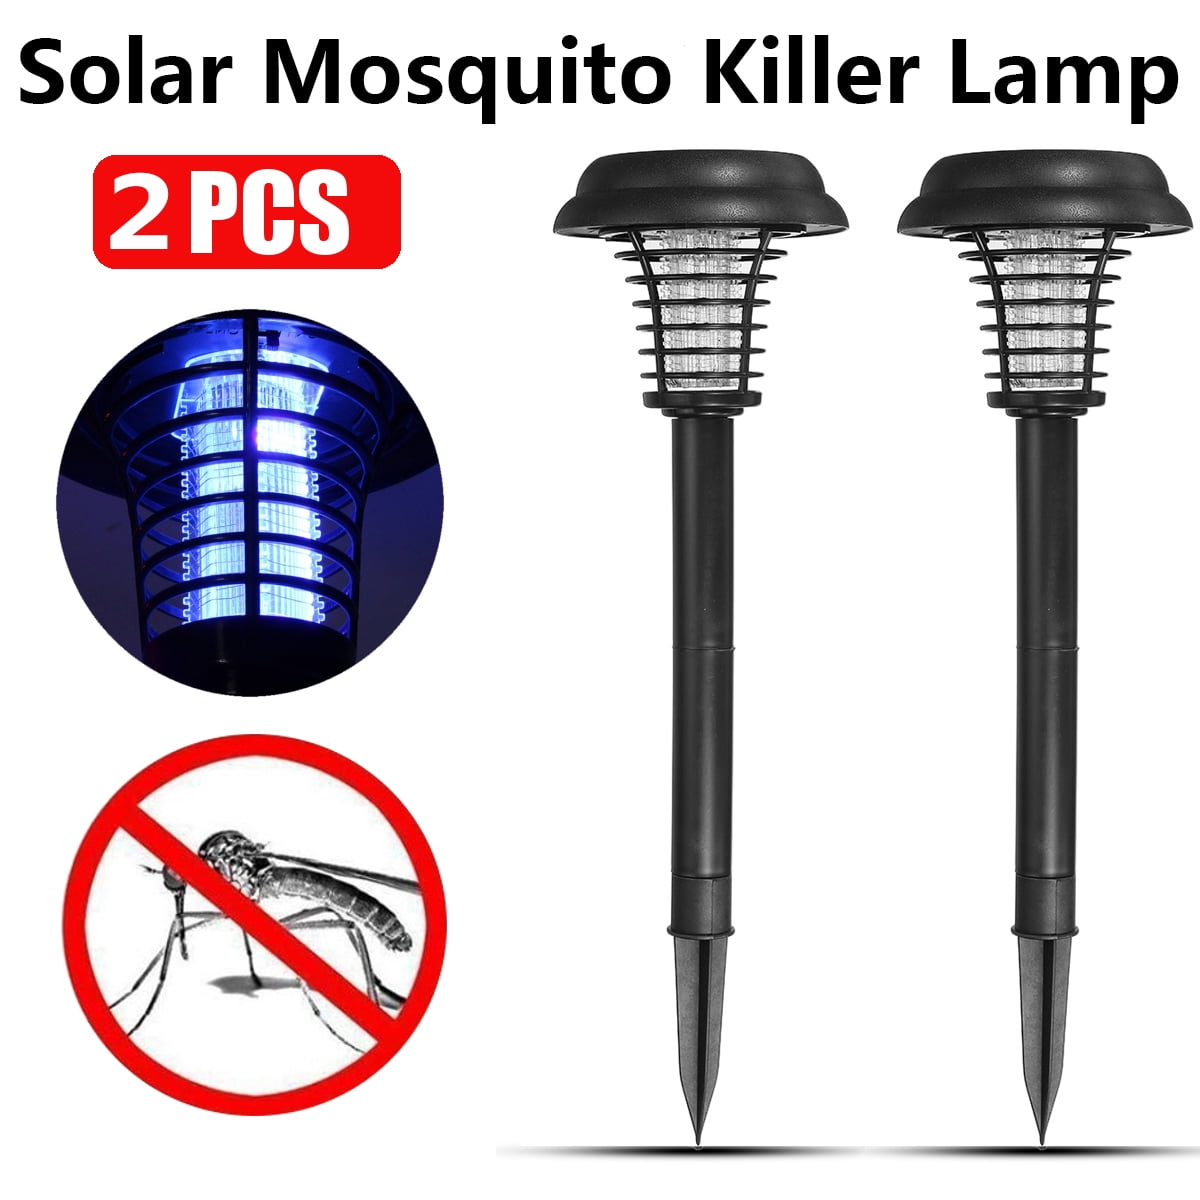 2 LED Garden Lawn Solar Mosquito Killer Lights Insect Pest Bug Zapper Yard Lamps 